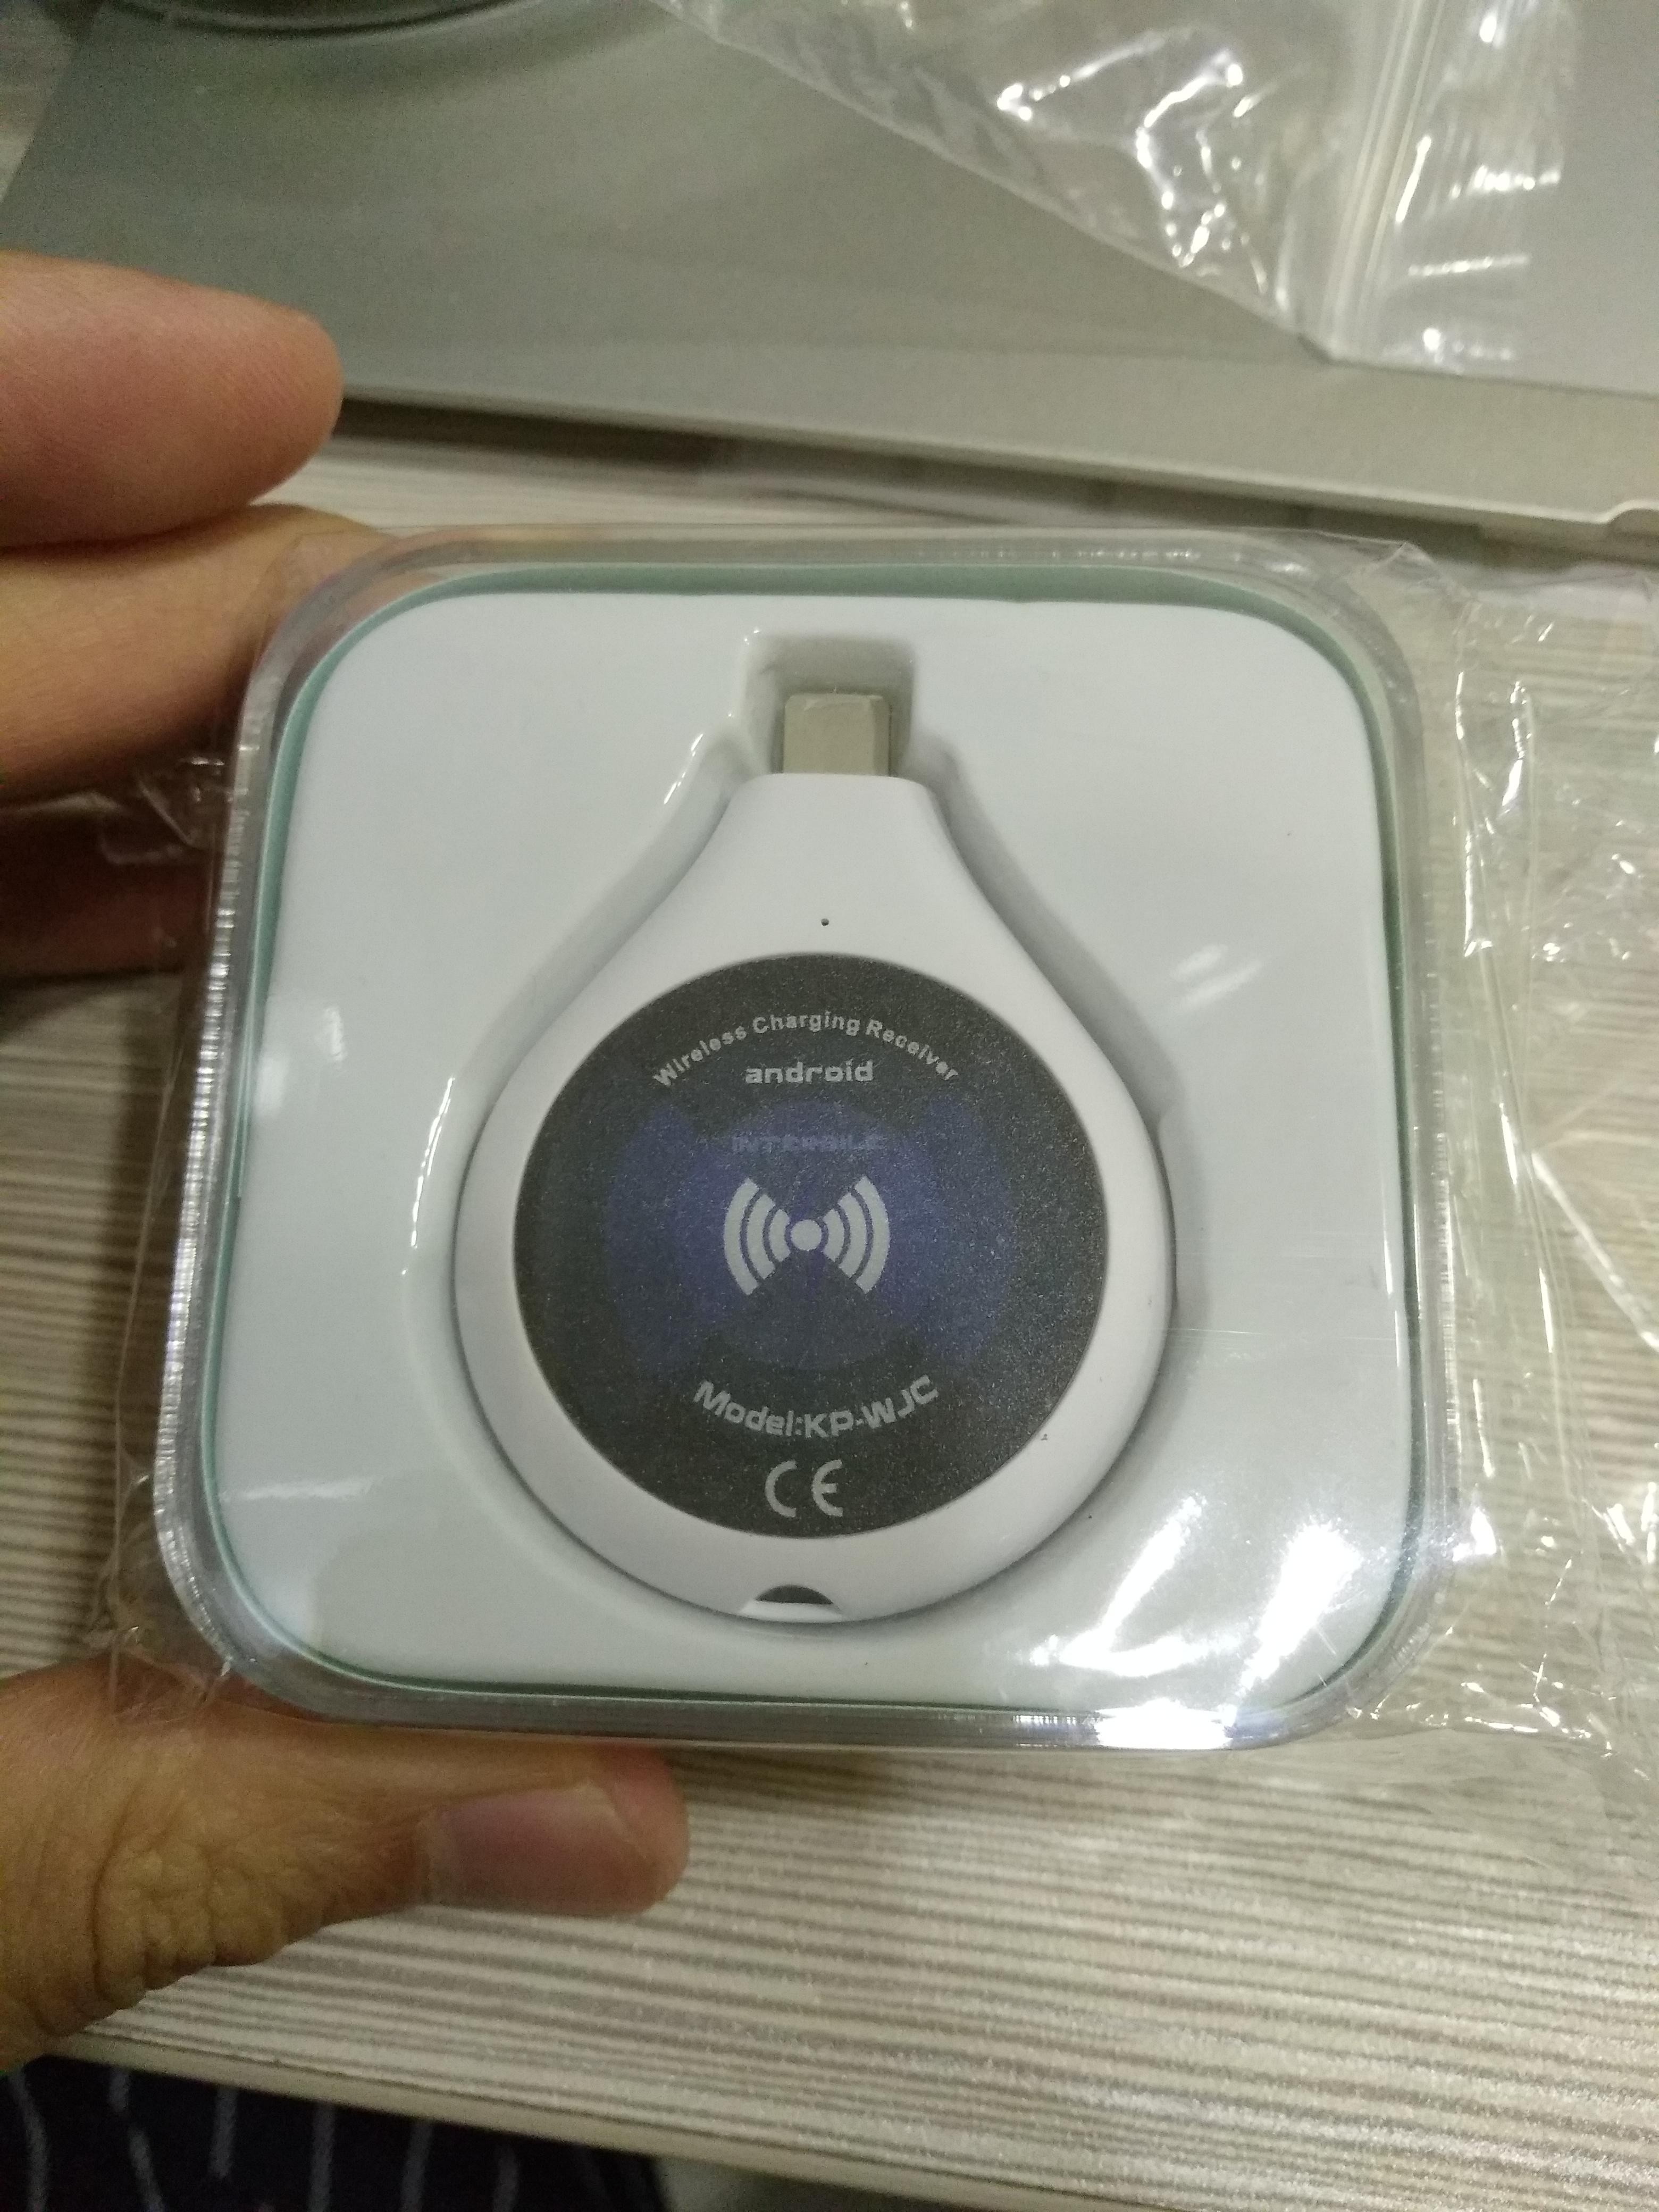 Public Wireless Charger Receiver